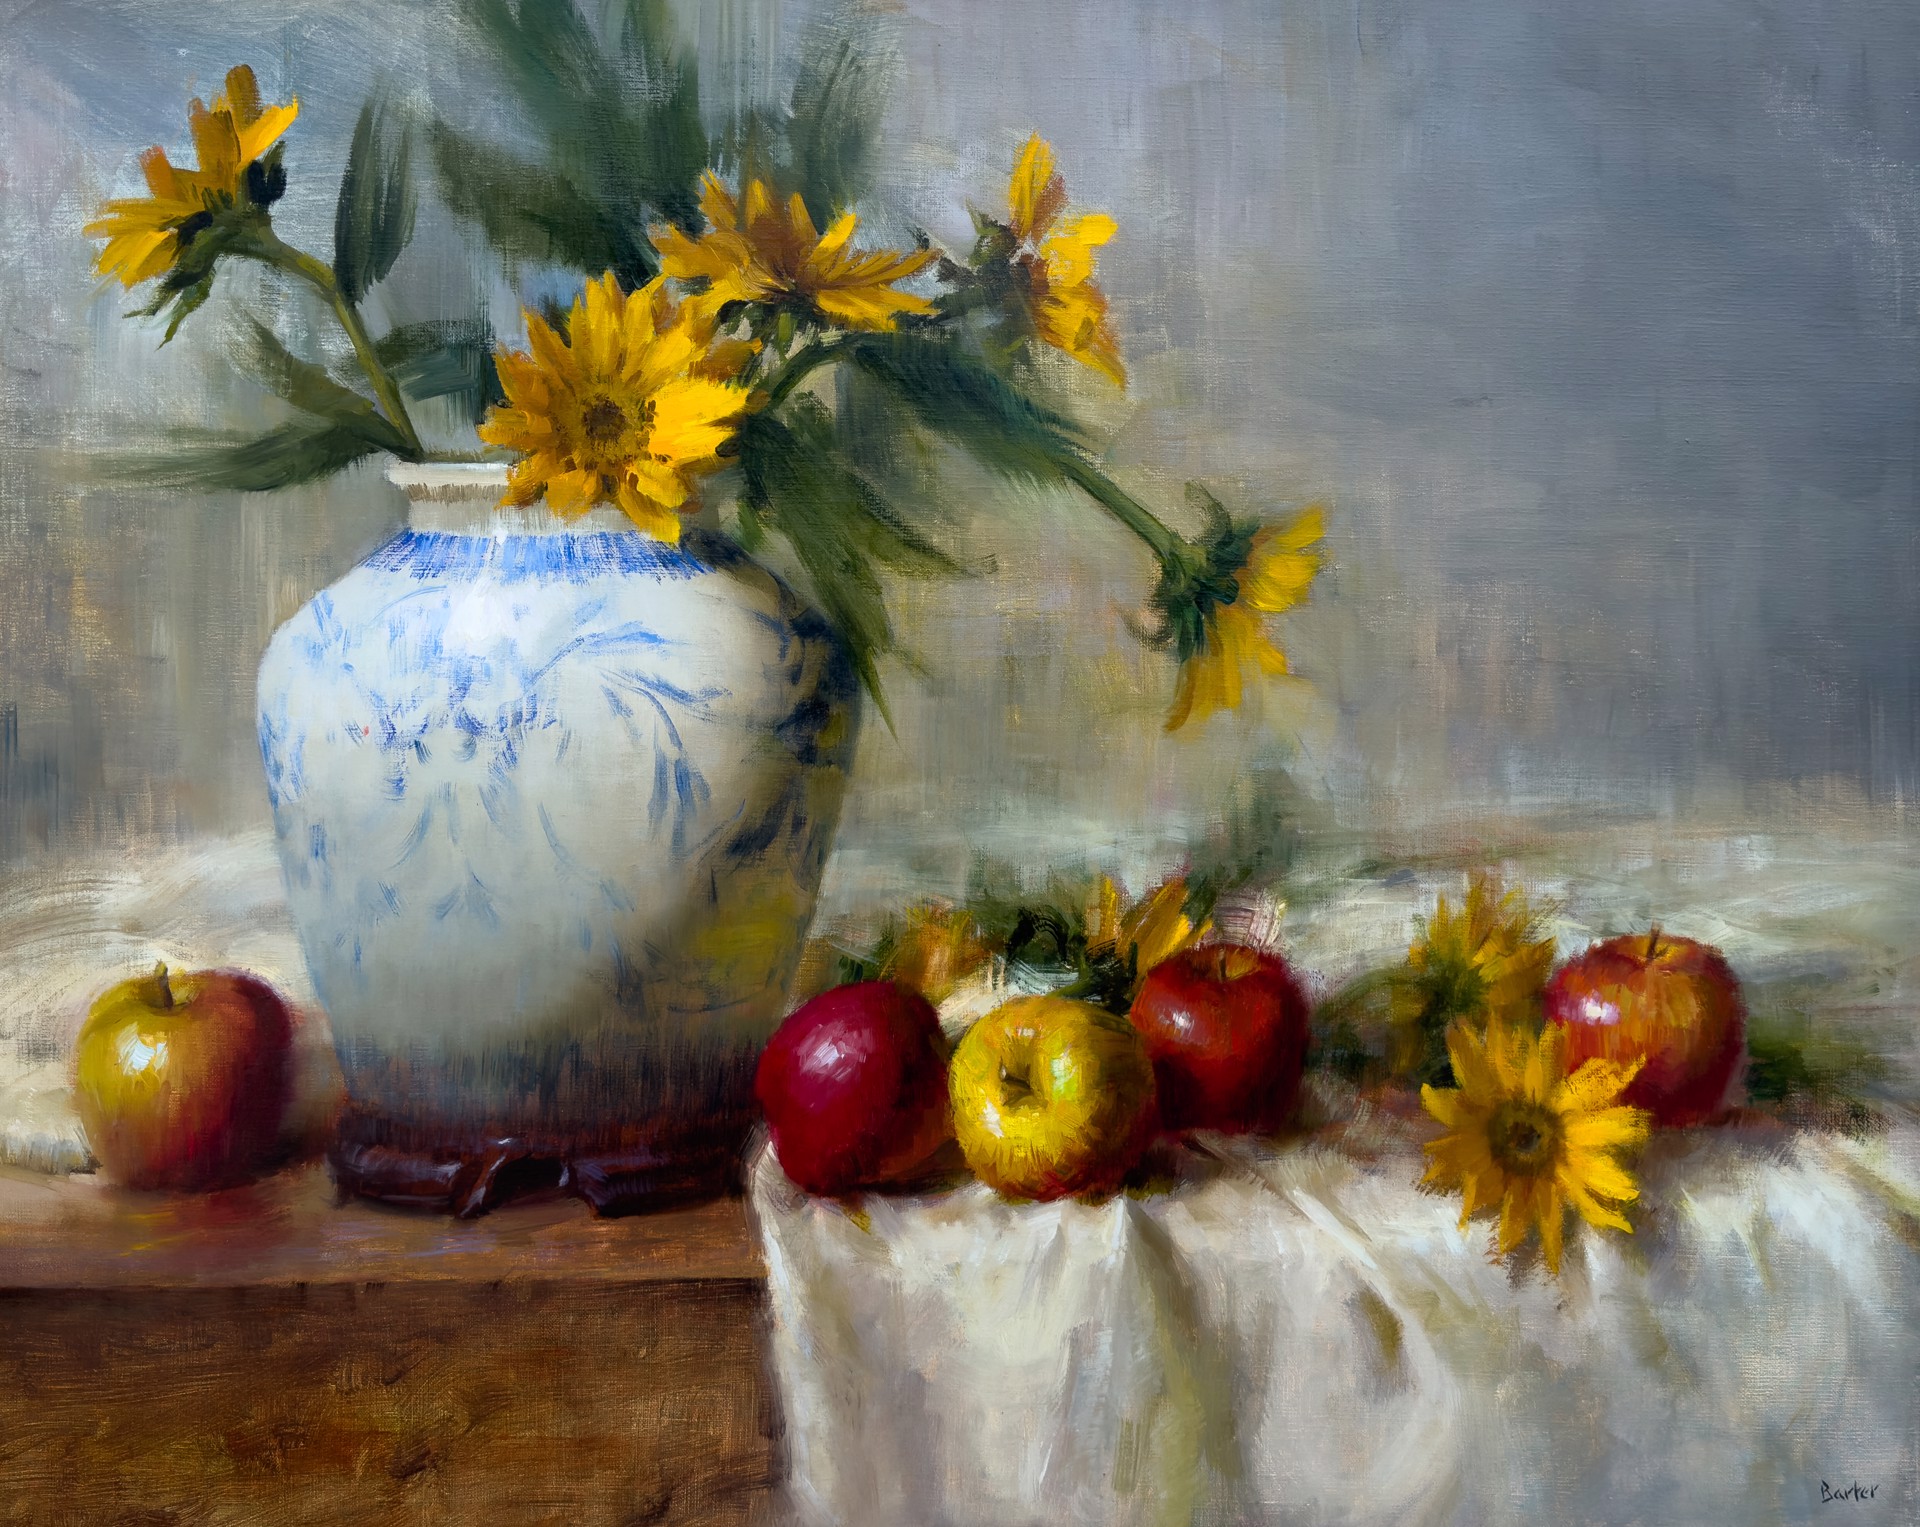 "Flow Blue with Farm Apples and Sunflowers" by Stacy Barter